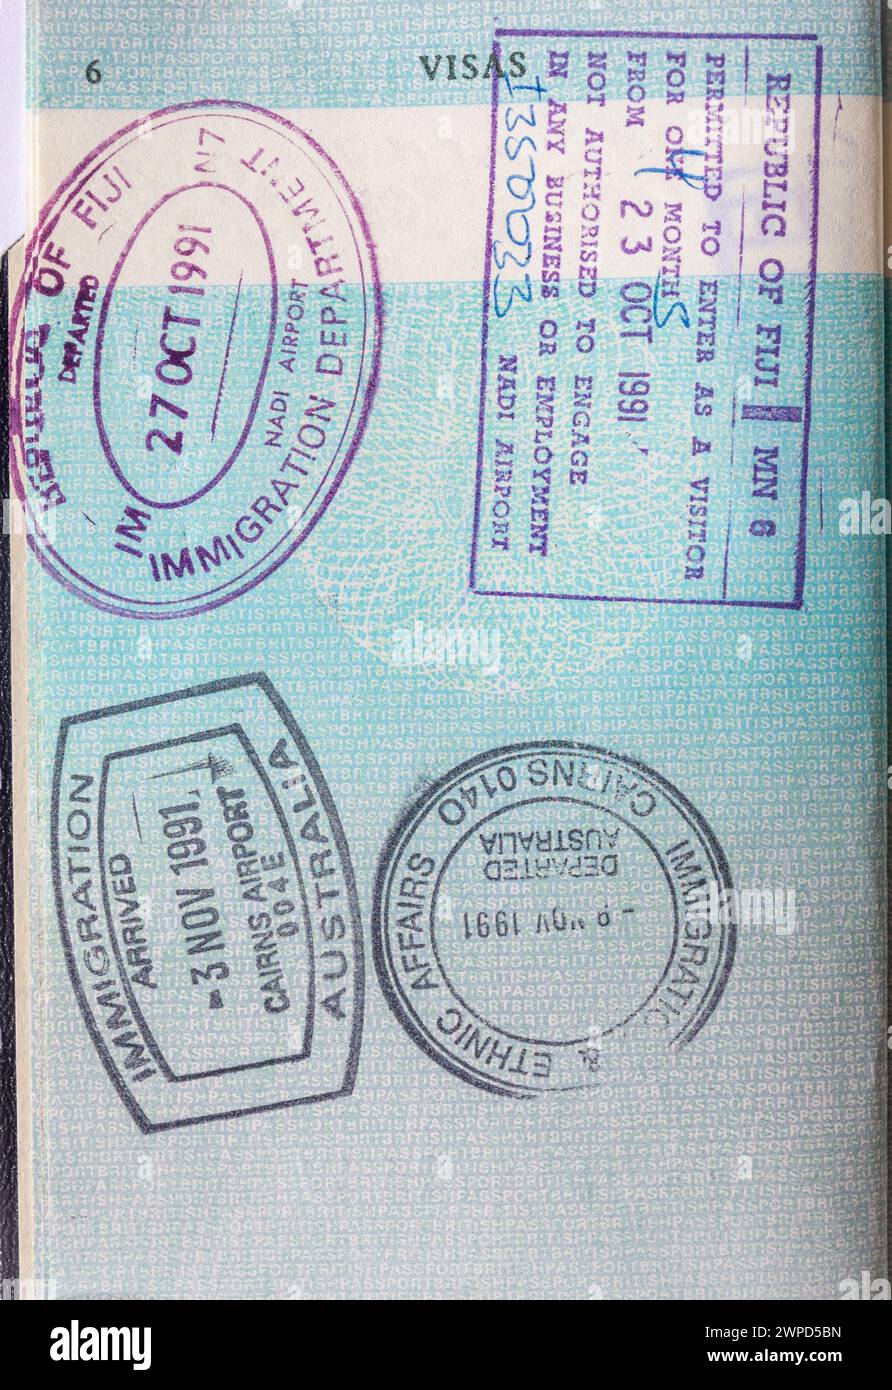 Entry and exit stamps in British passport for visits to Australia and Fiji Stock Photo